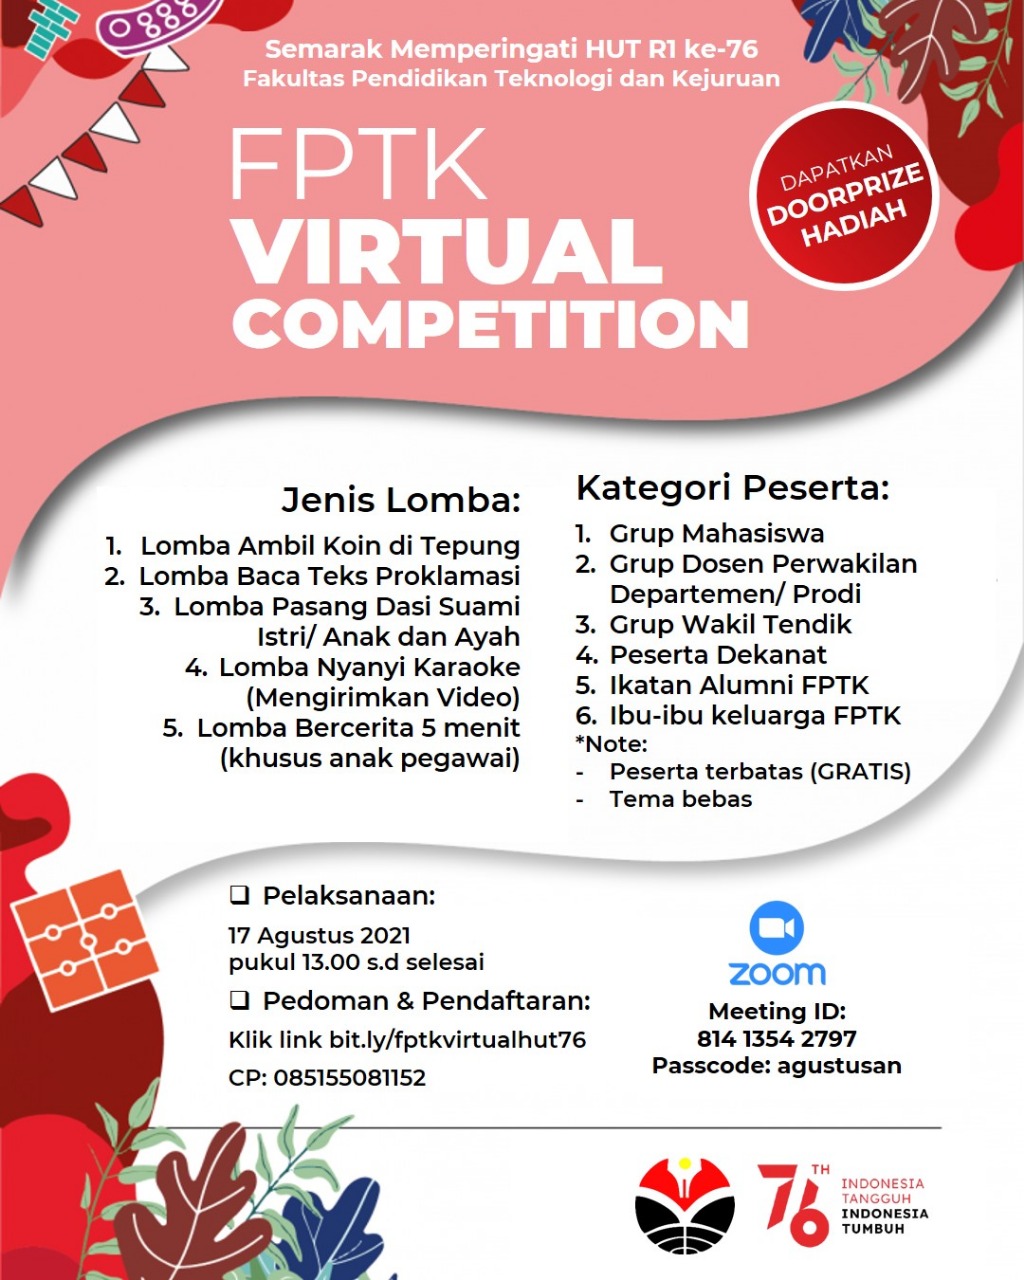 FPTK Virtual Competition